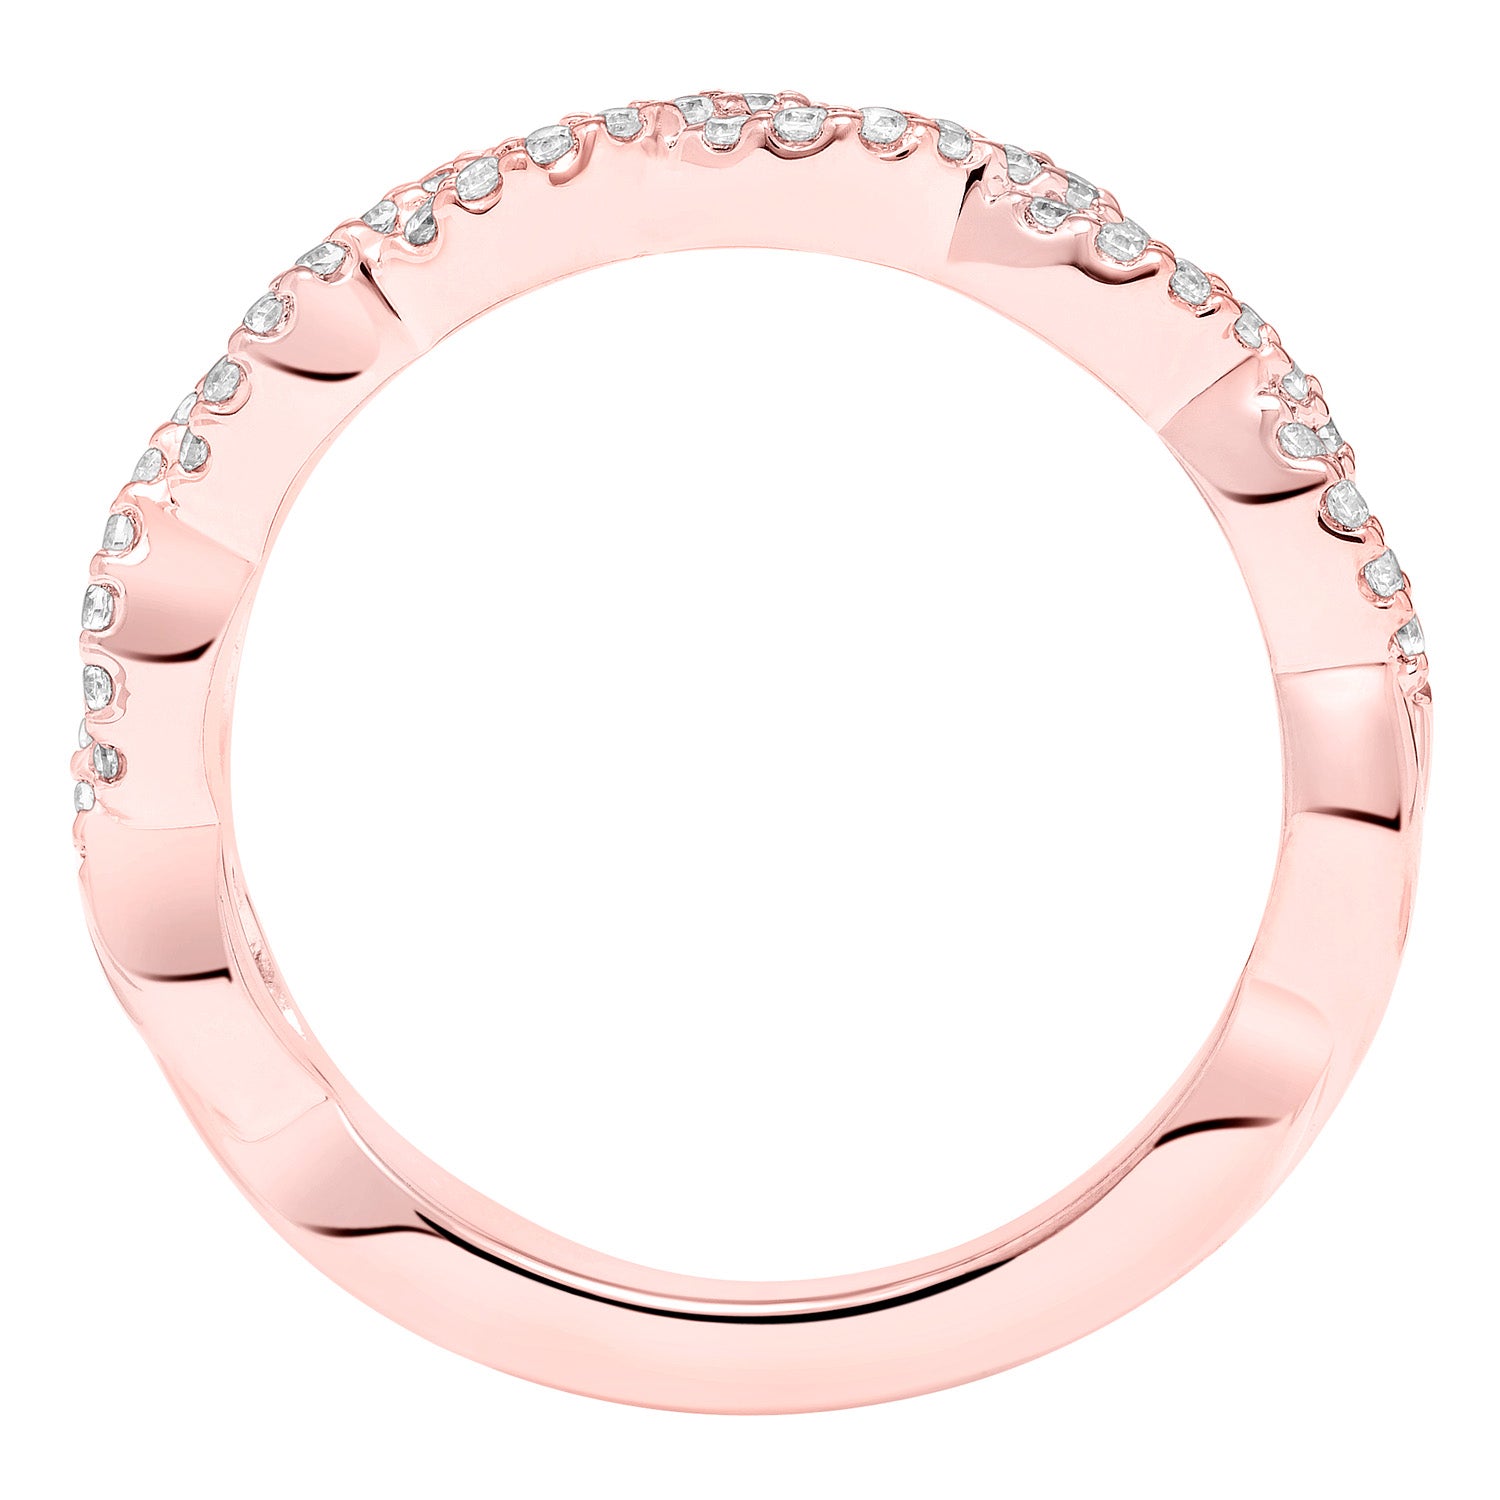 Artcarved Cherie Diamond Wedding Band in 14kt Rose Gold (1/4ct tw)